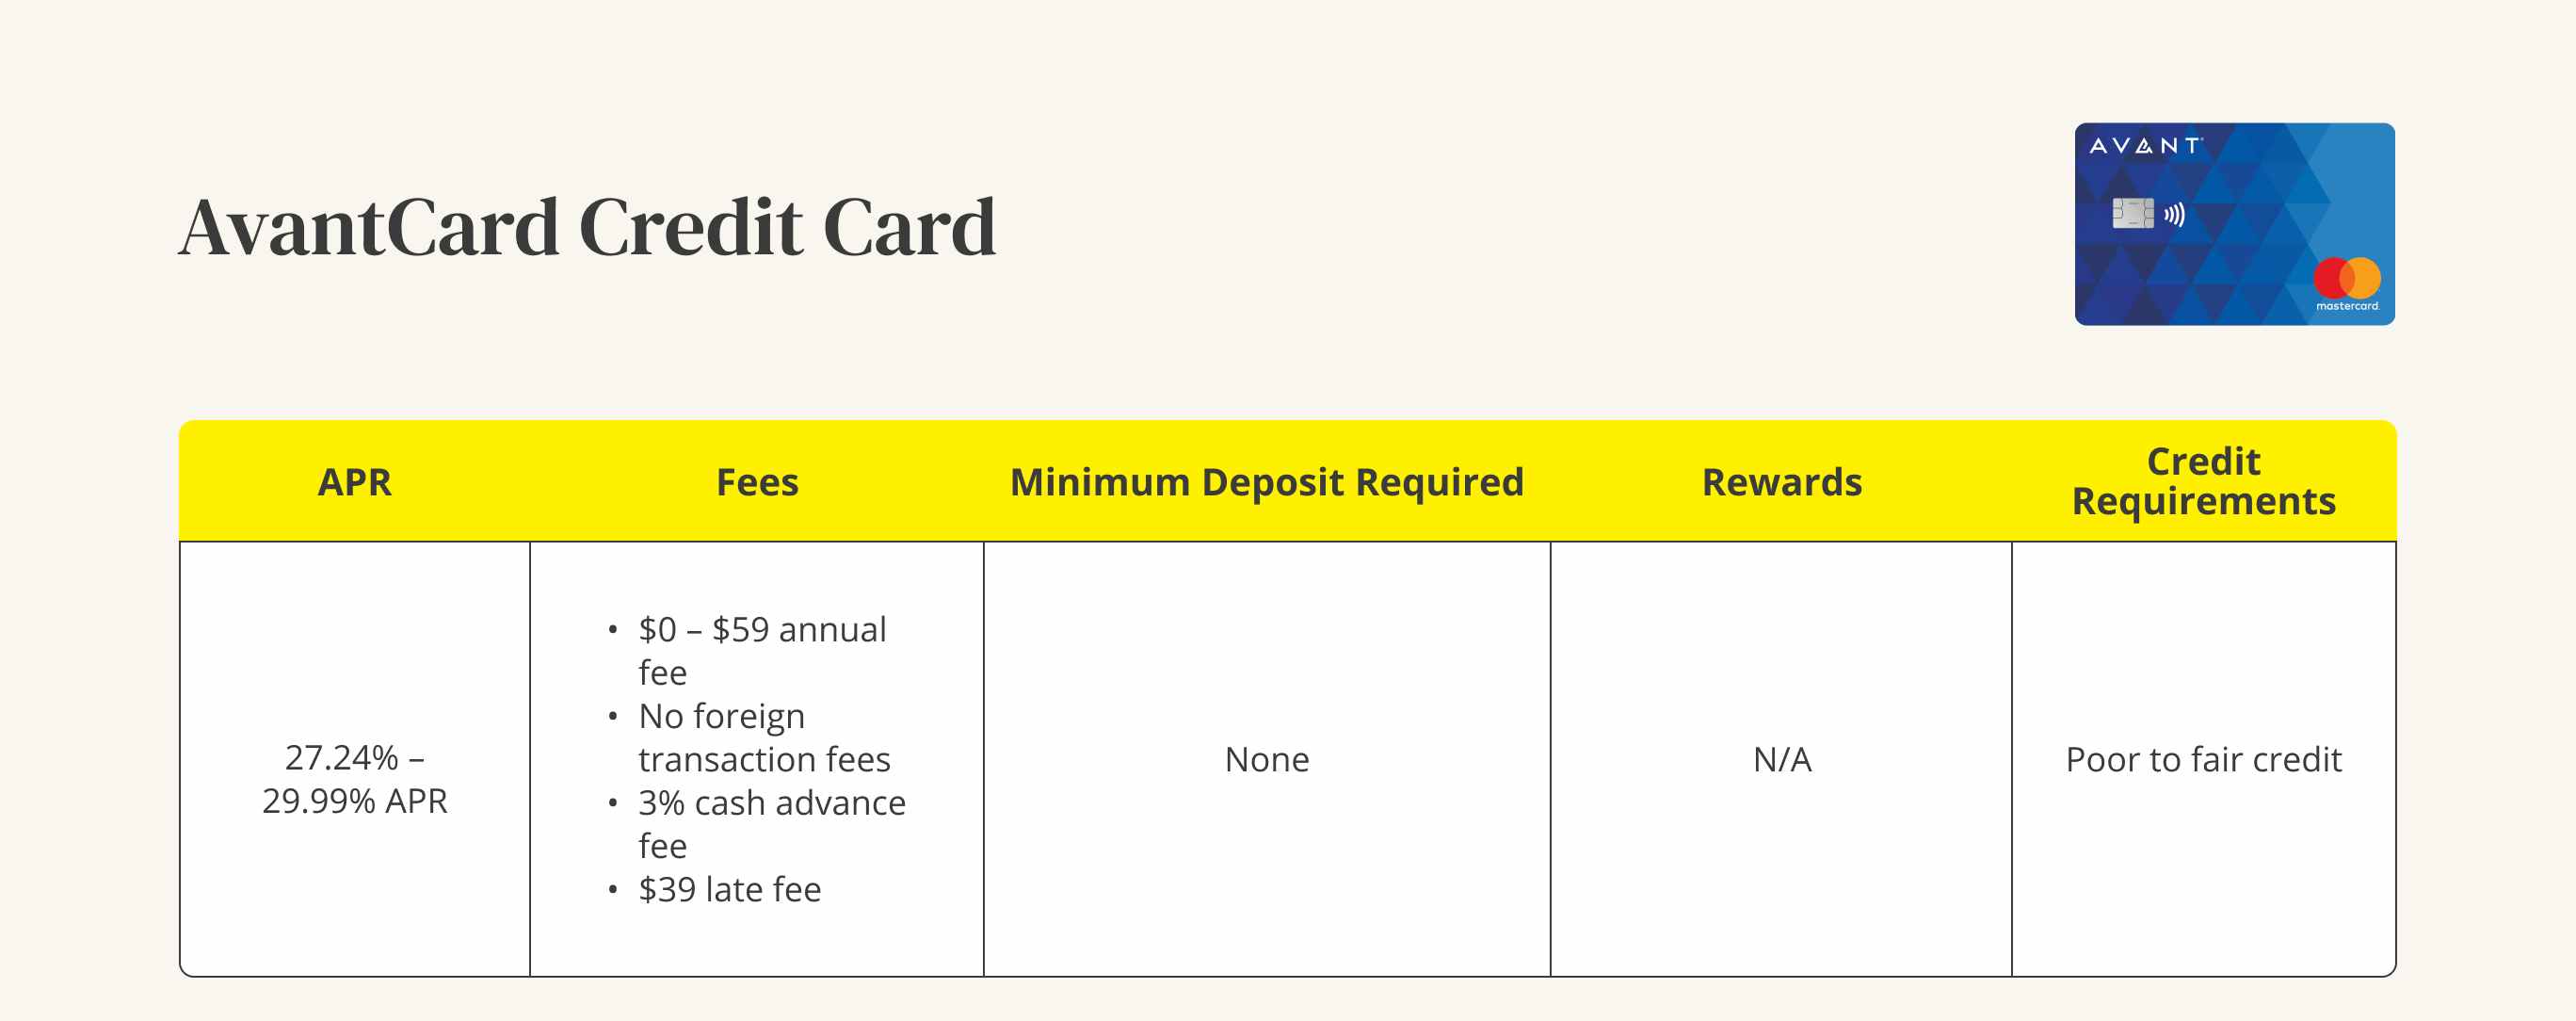 A graphic showing the APR, fees, minimum deposit, rewards, and credit requirements for an AvantCard credit card